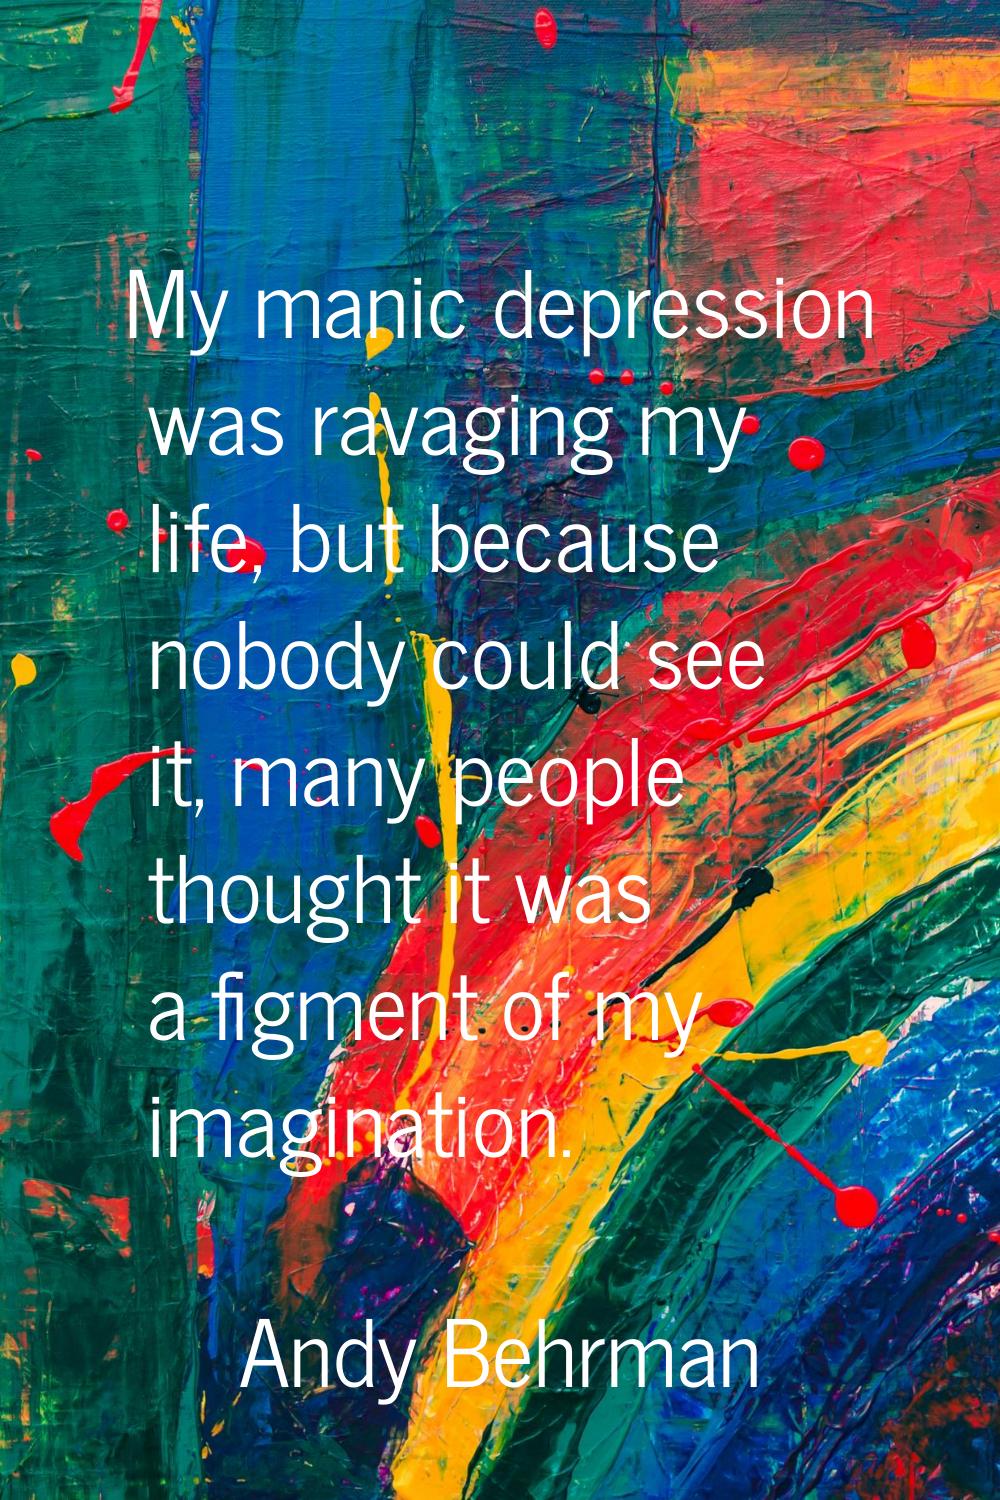 My manic depression was ravaging my life, but because nobody could see it, many people thought it w